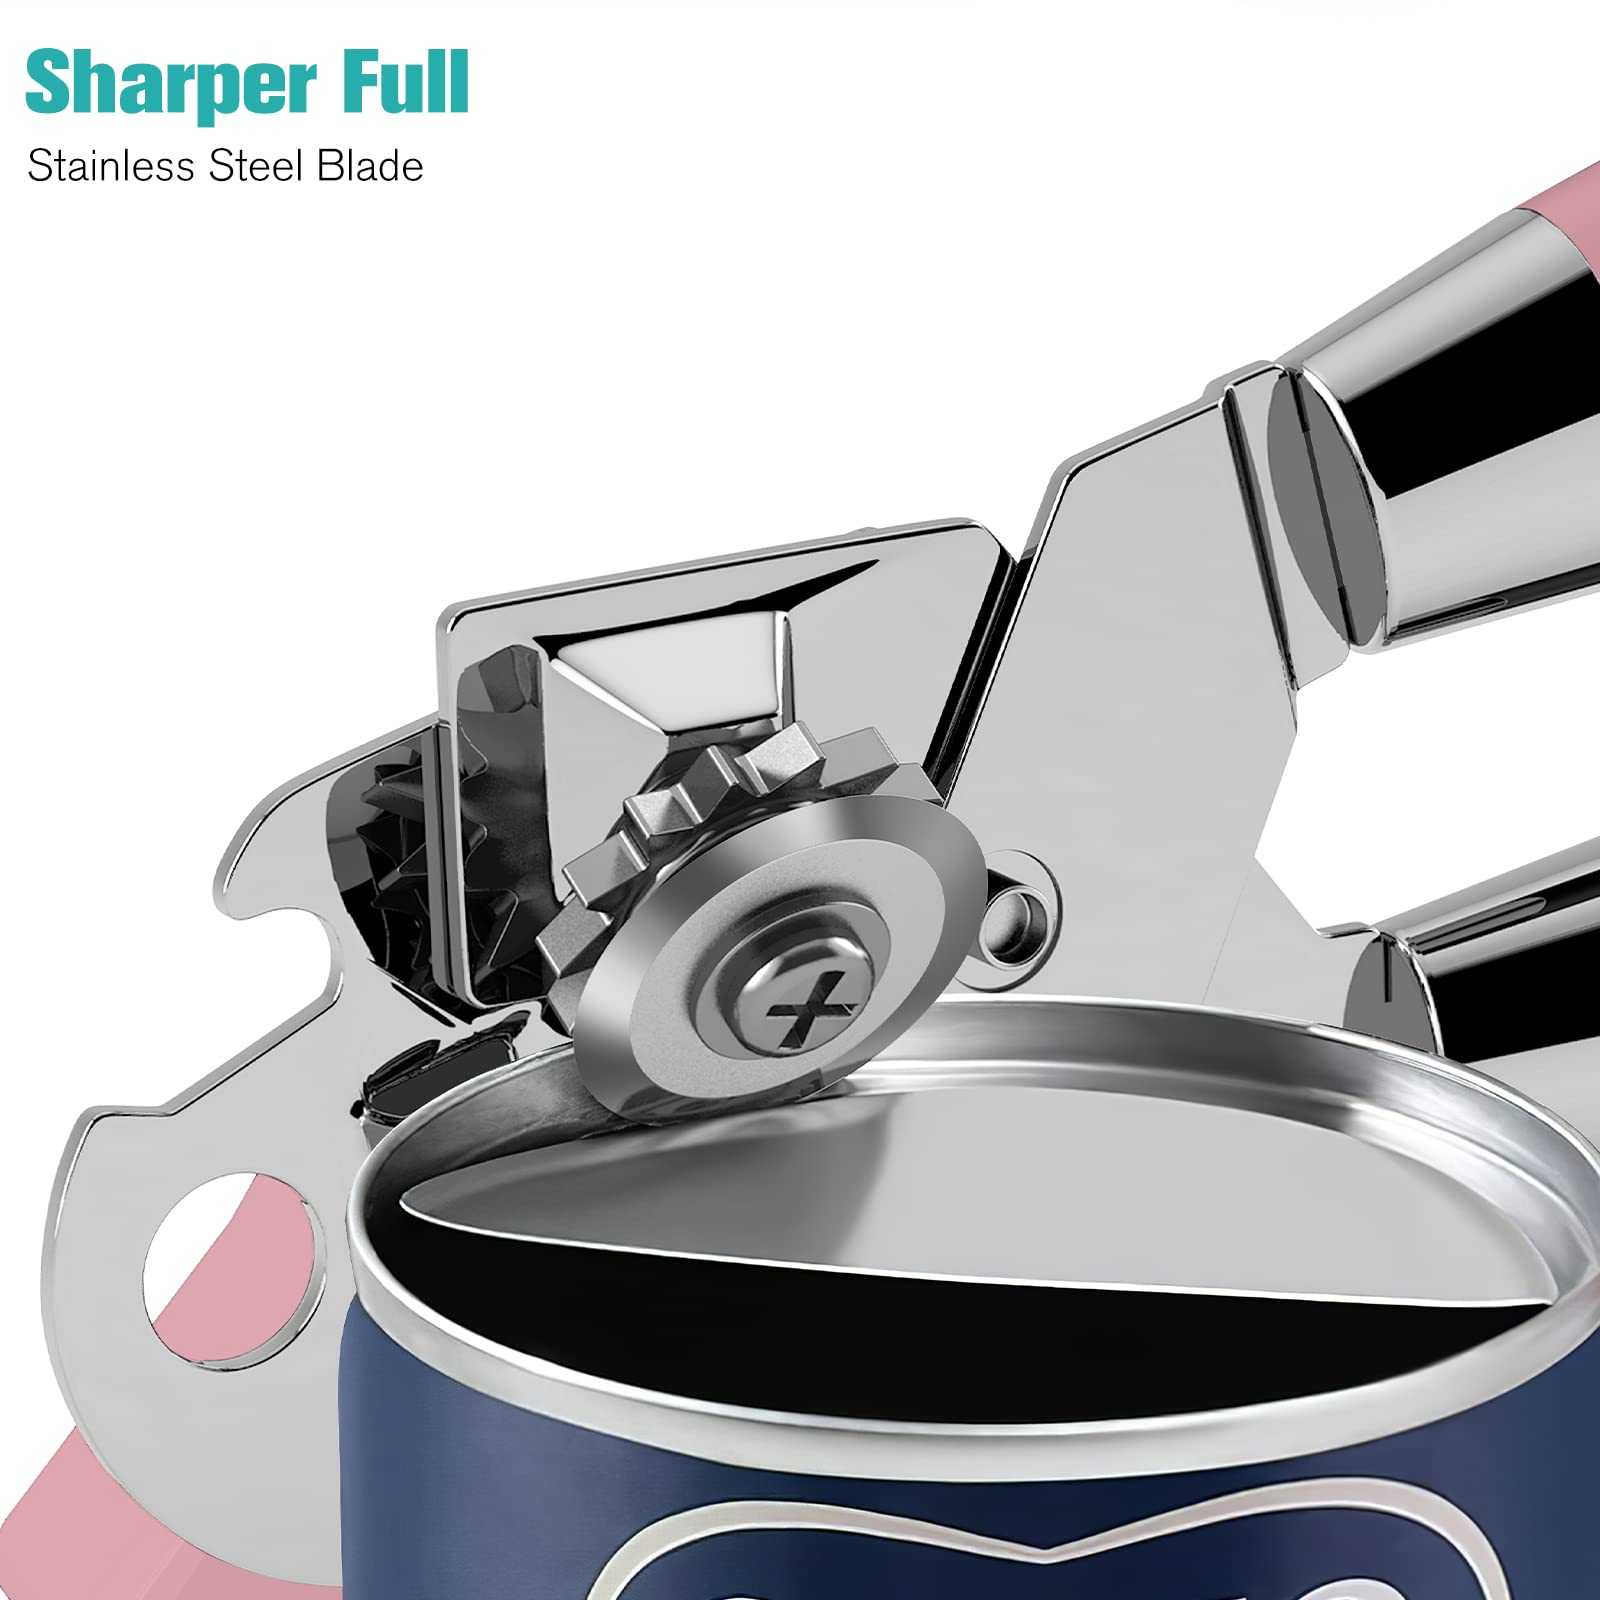 Can Opener,Professional 3-In-1 Multifunctional Manual Can Openers Bottle Opener,Kitchen Durable Stainless Steel Heavy Duty Can Opener Smooth Edge for Kitchen Seniors Friendly